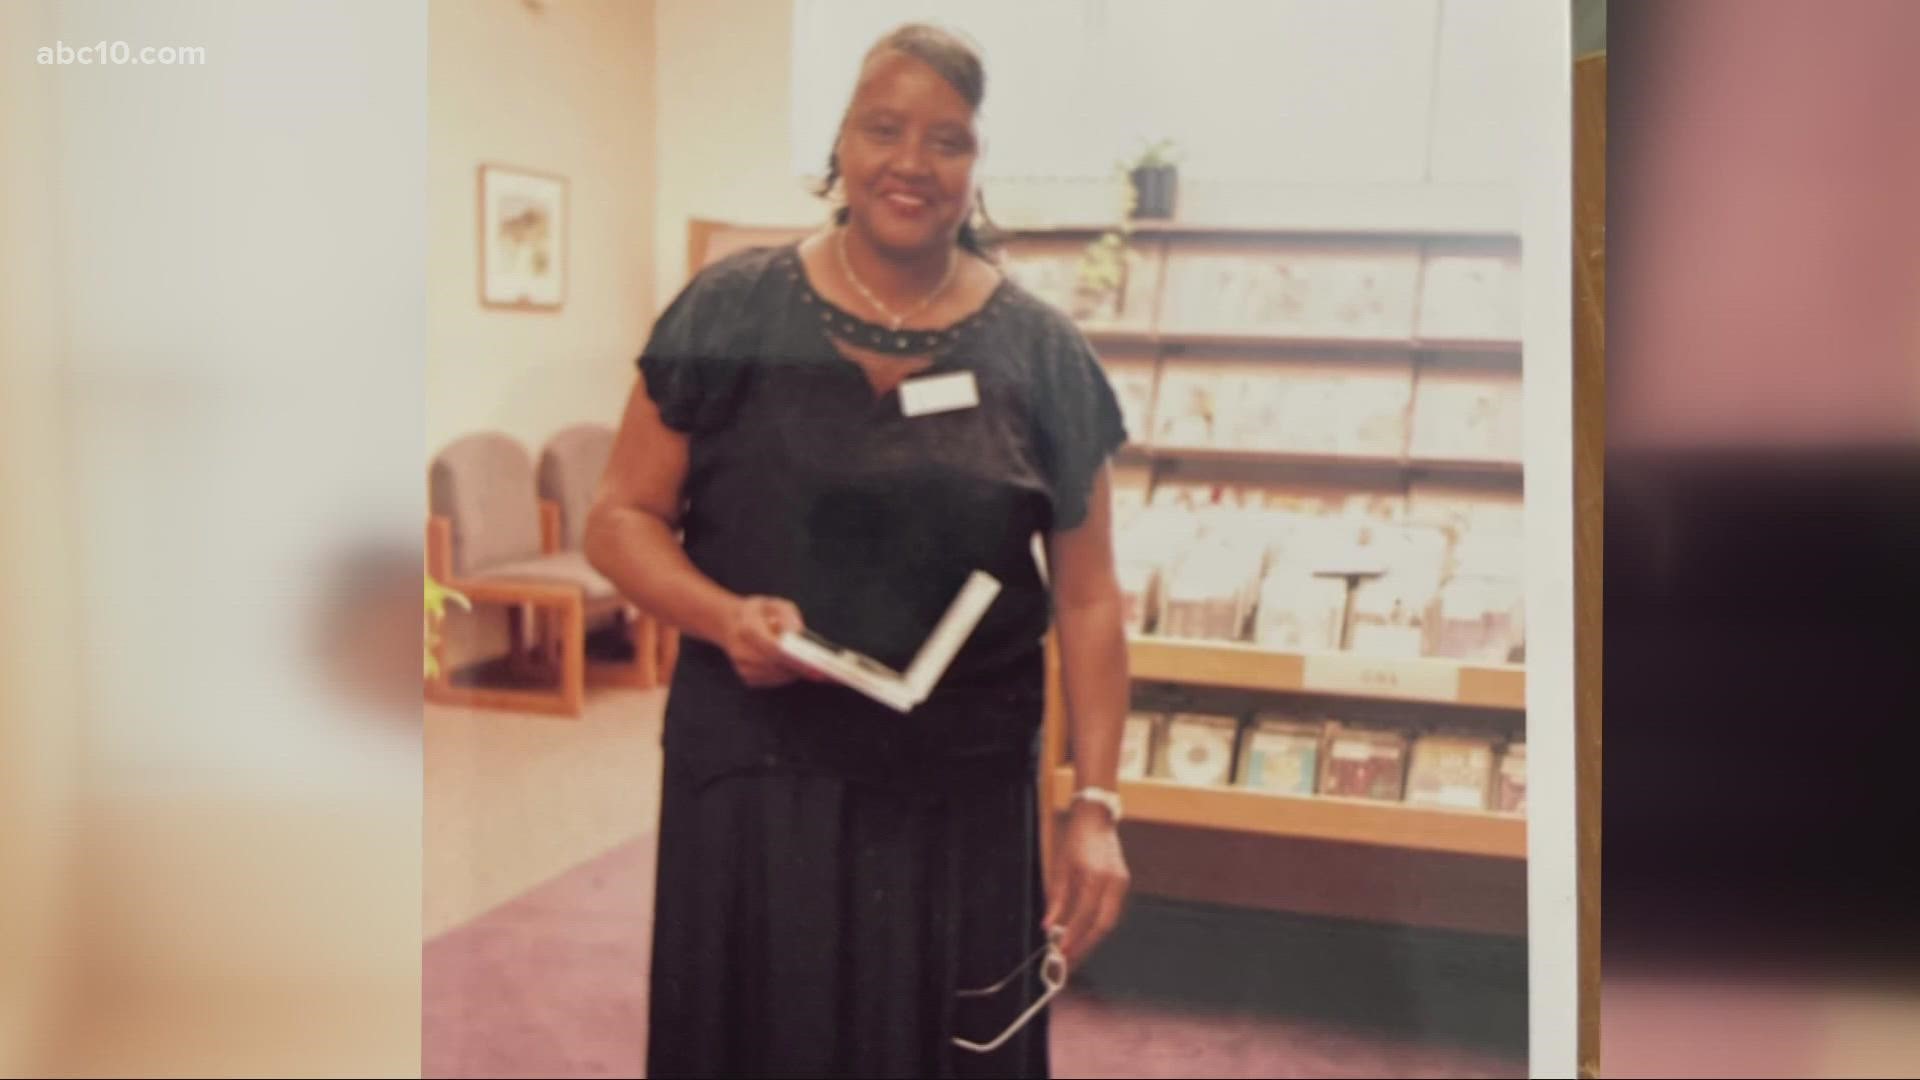 69-year-old Lorraina Harris is leaving behind a lasting impact on the community after serving as a library aide for more than three decades.